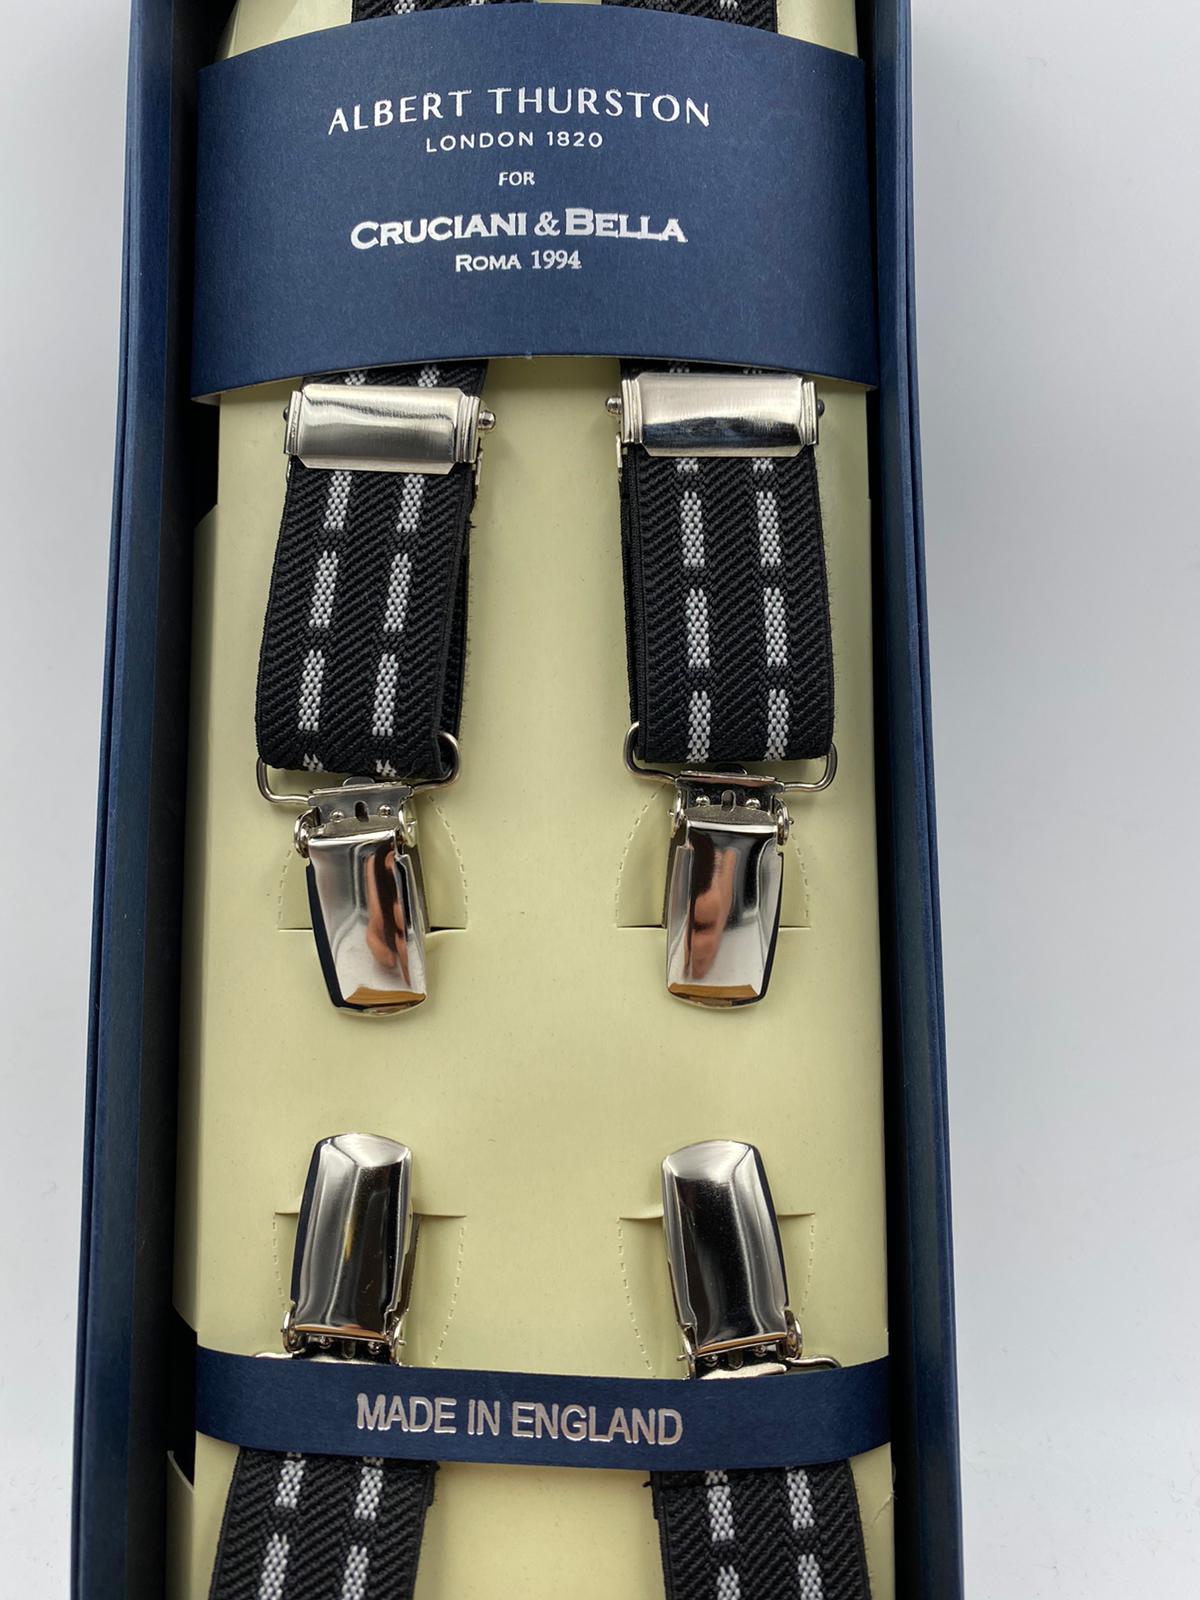 Albert Thurston for Cruciani & Bella Made in England Clip on Adjustable Sizing 25 mm elastic braces Black and White Stripes X-Shaped Nickel Fittings Size: L #0272